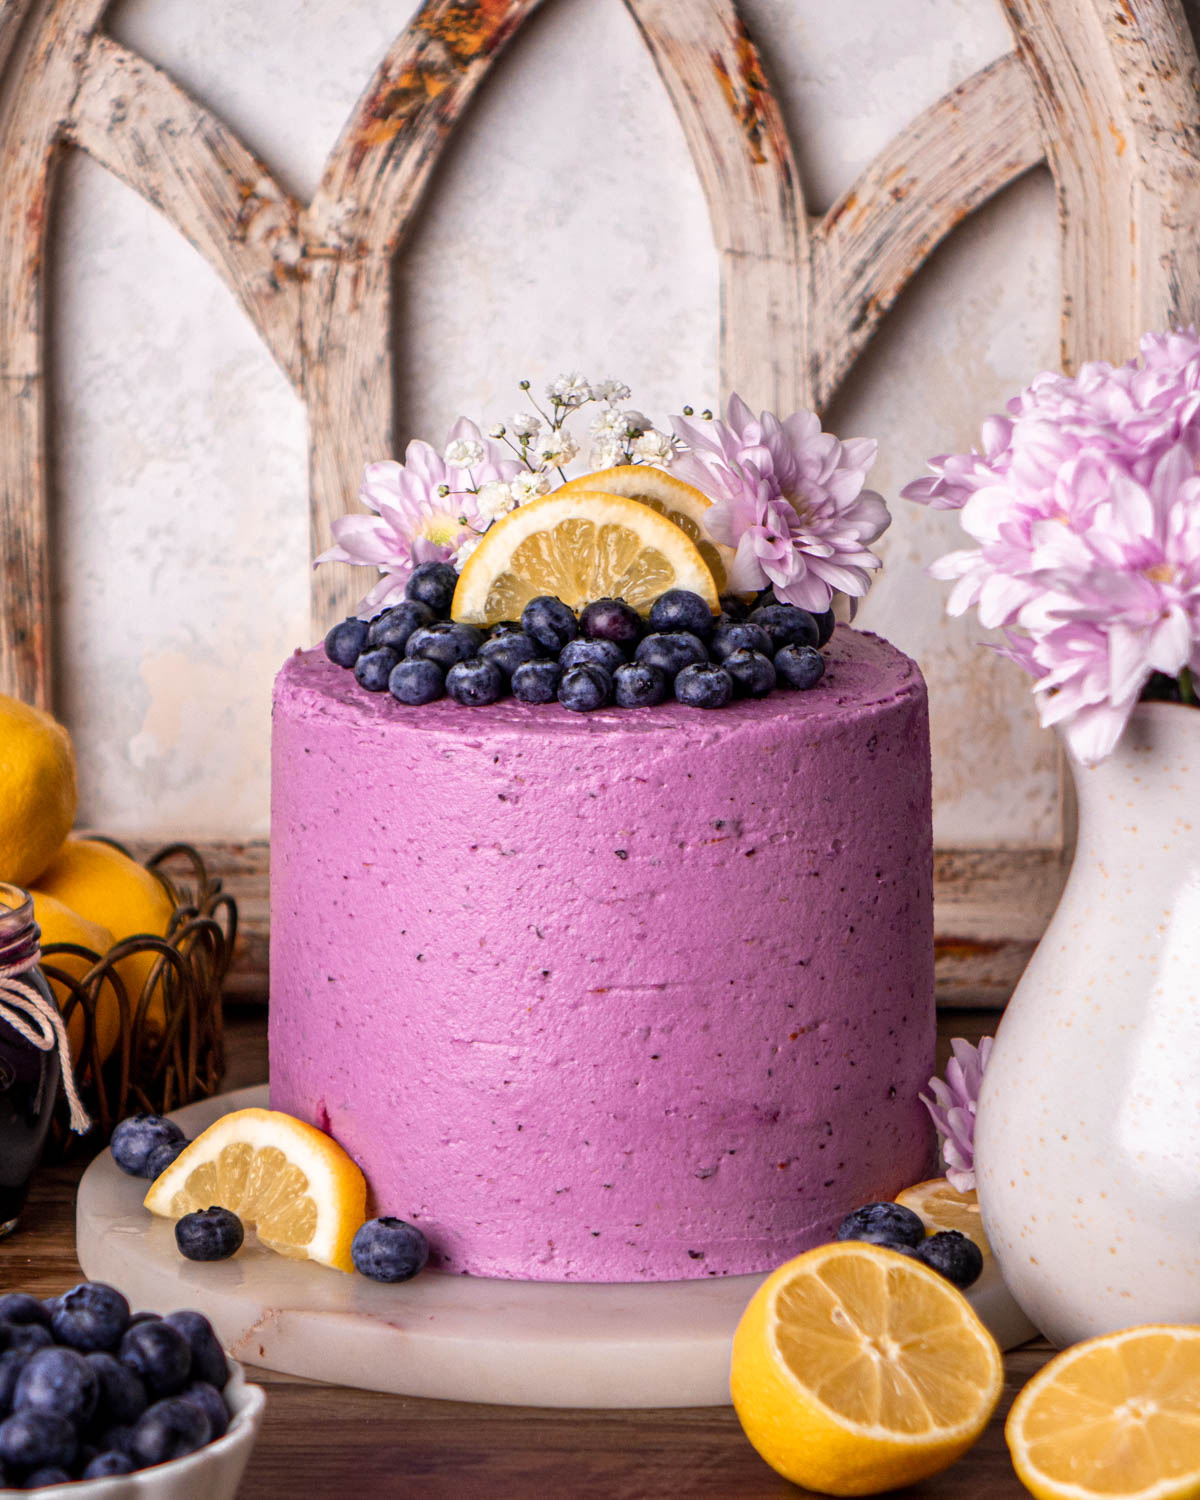 blueberry lemon cake frosted with purple frosting, topped with blueberries, lemon slices and flowers